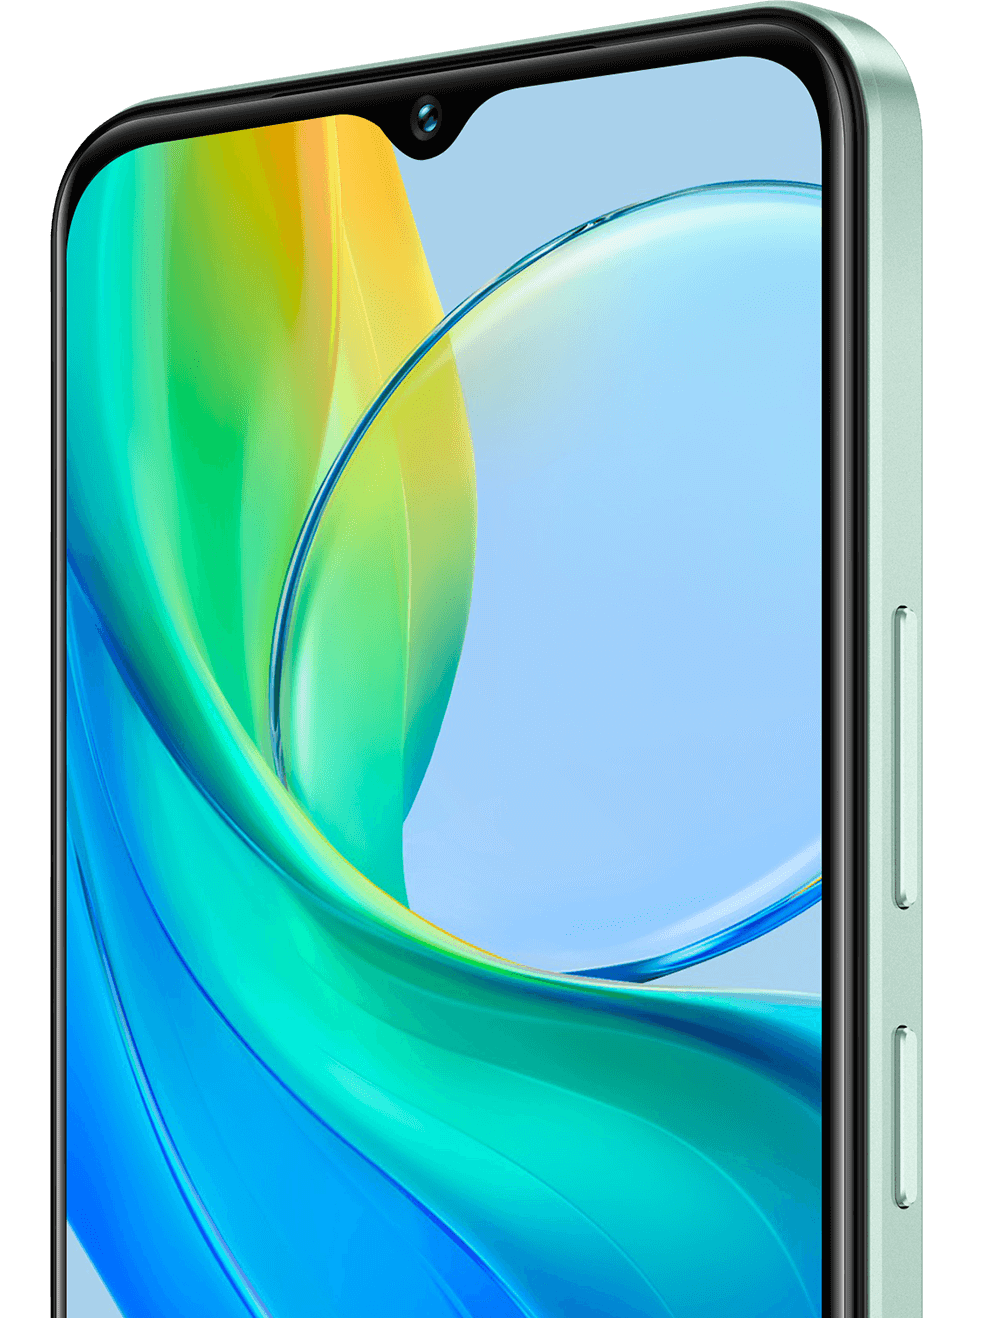 vivo Y03 with 2.5D curved design